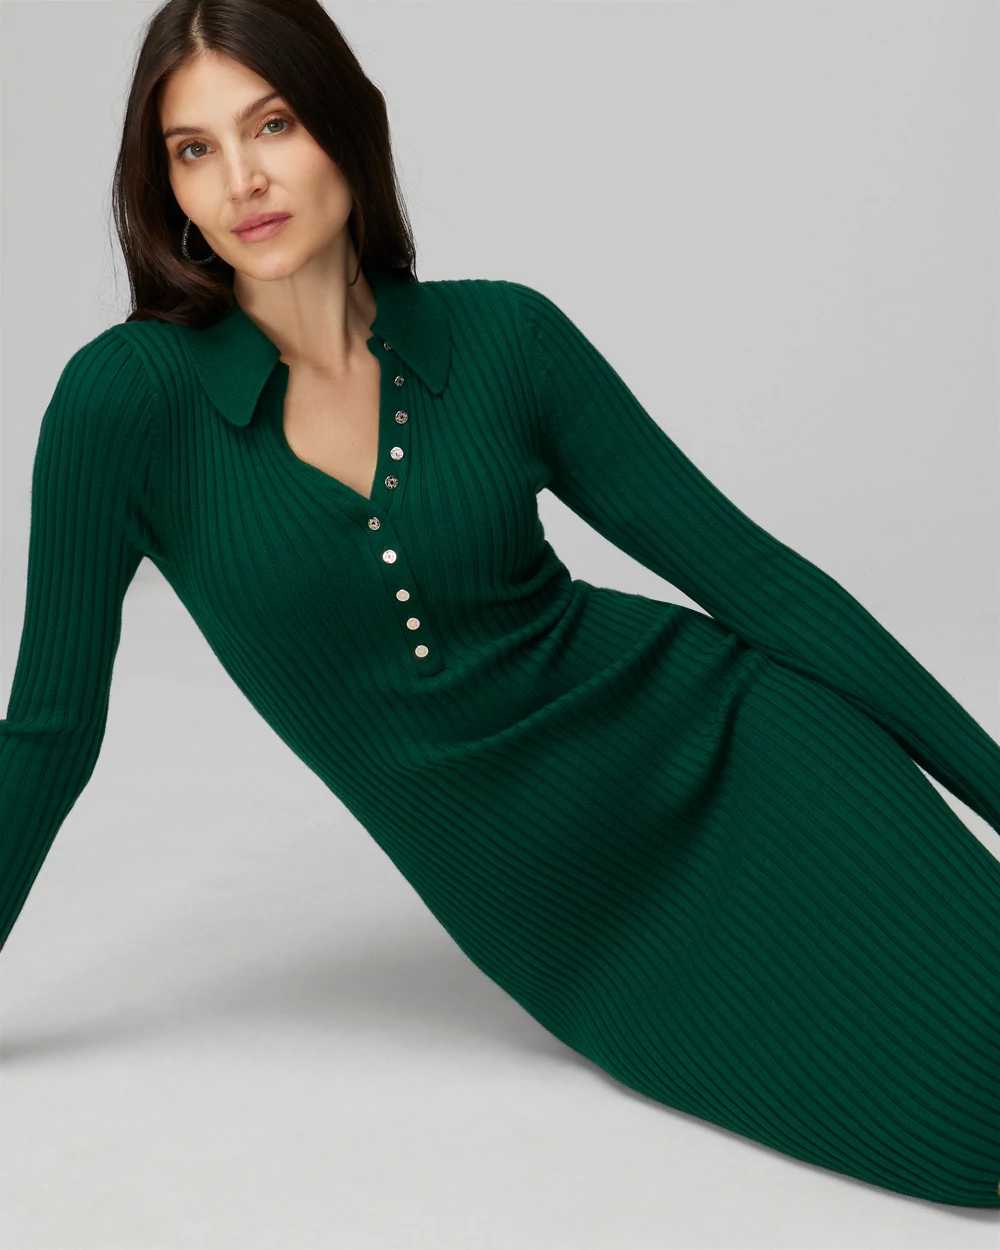 Long Sleeve Rib Sweater Dress click to view larger image.